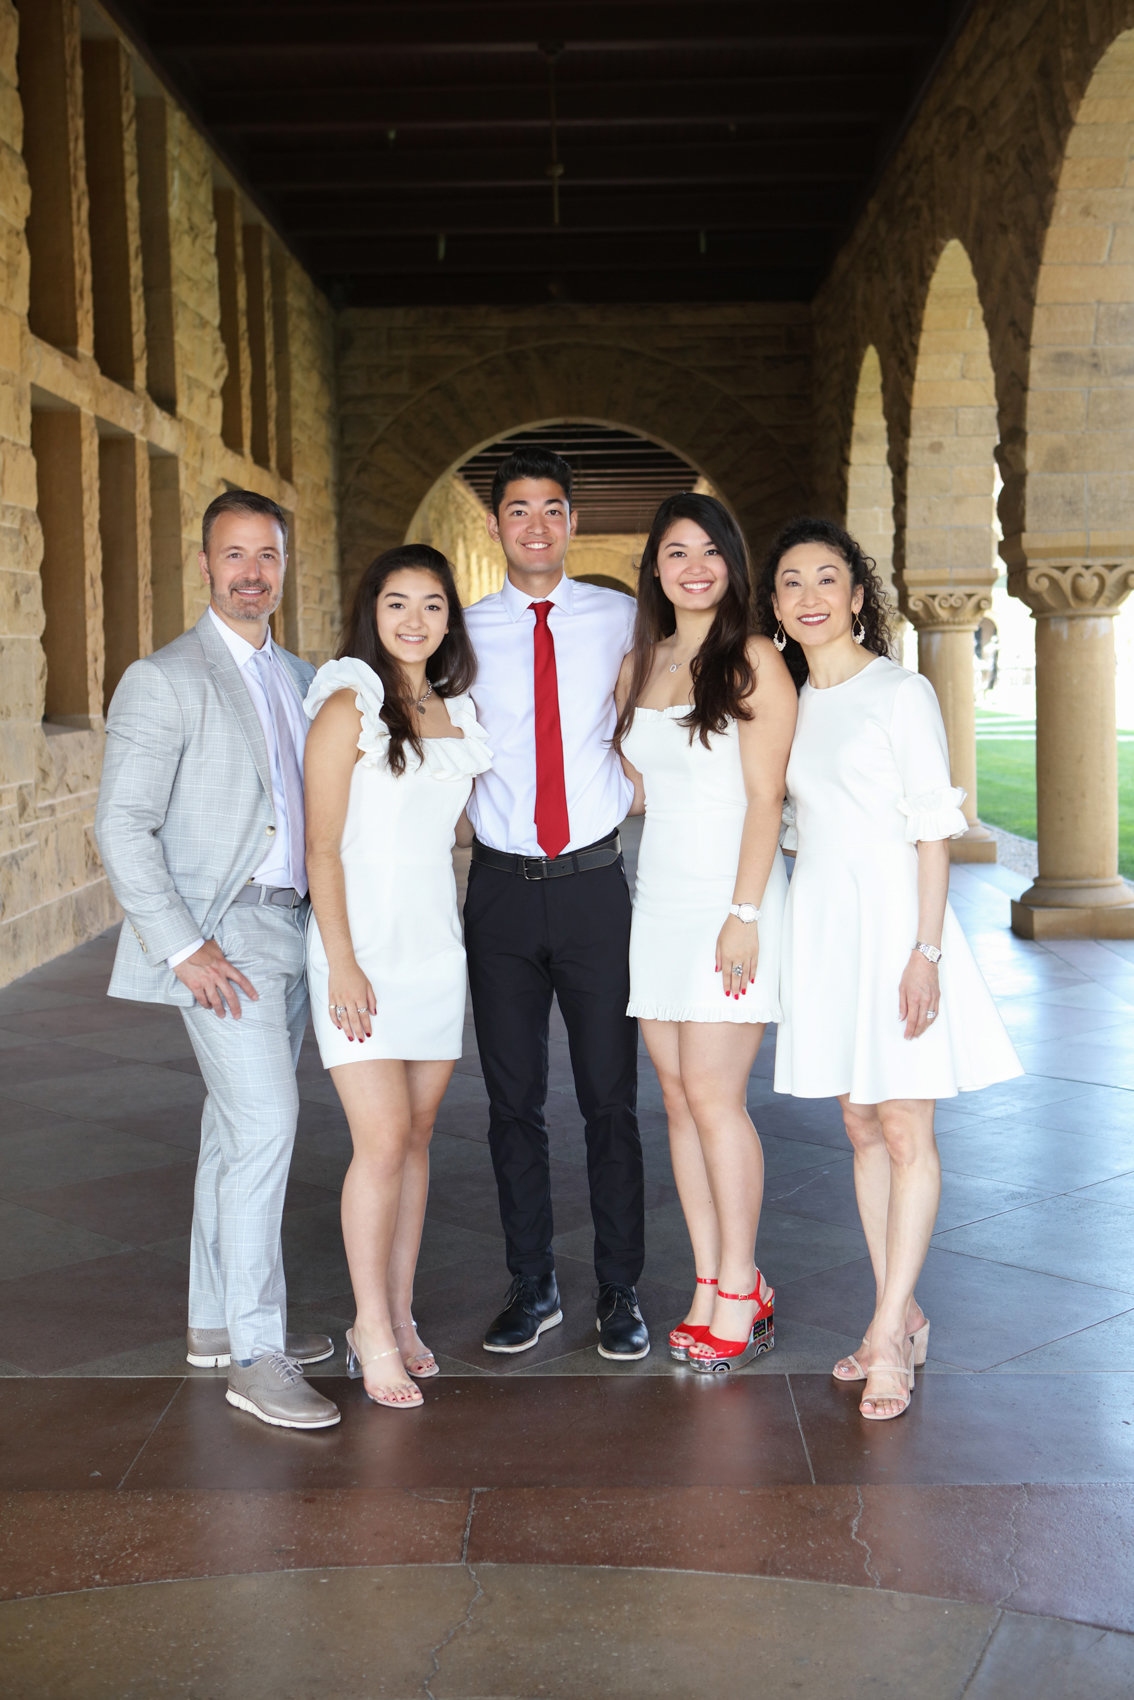 Stanford graduate with family, outdoor photoshoot